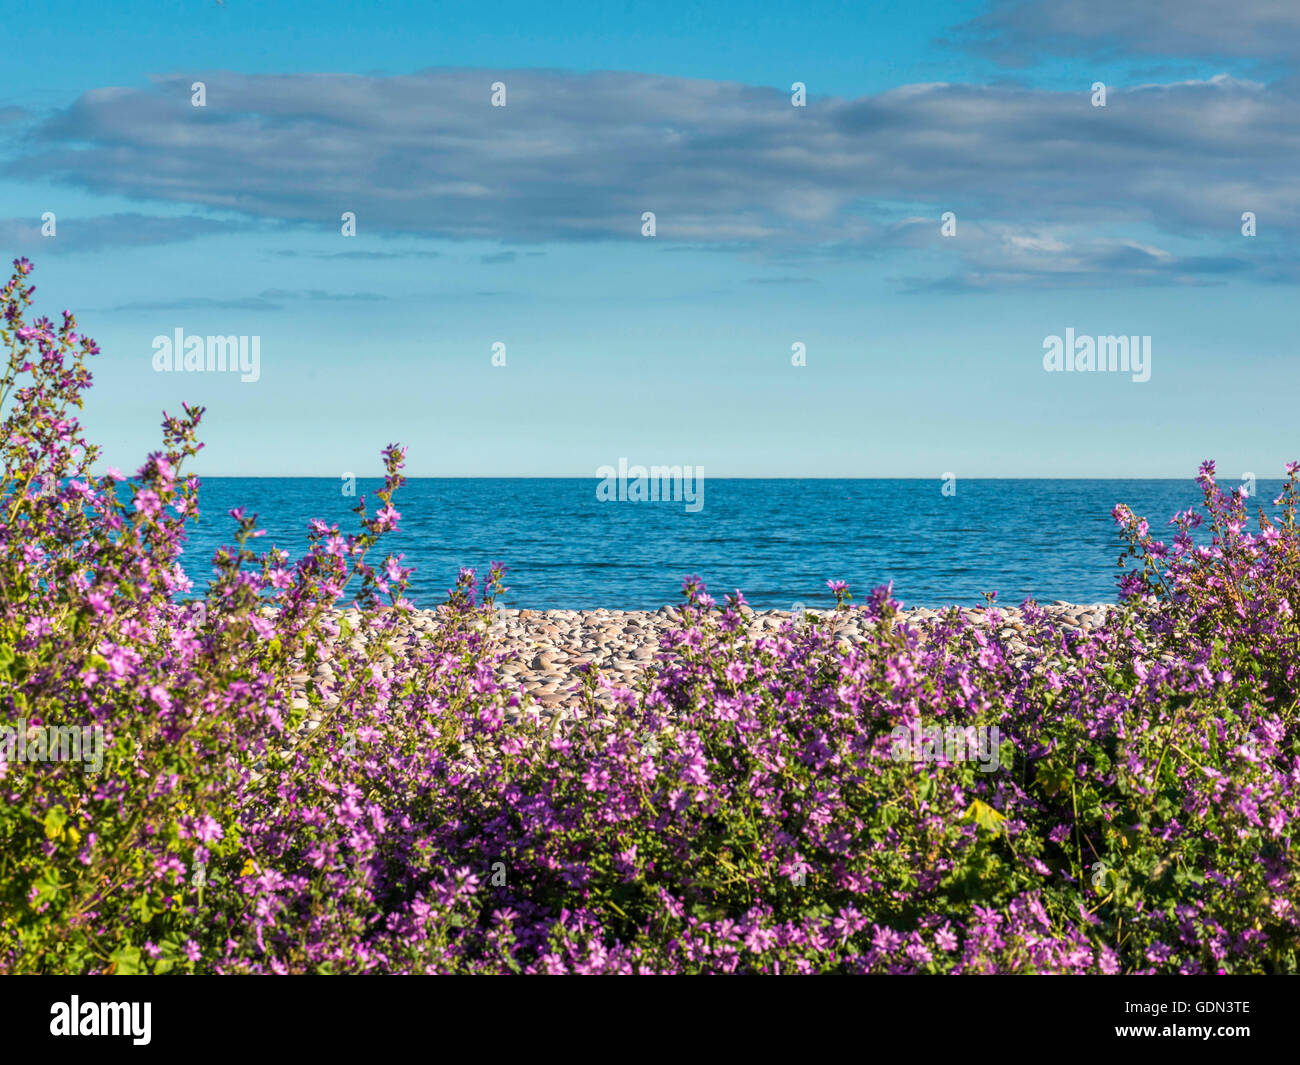 Summer seaside scene depicting pebble beach with mass of pink flowers with blue sky backdrop. Stock Photo